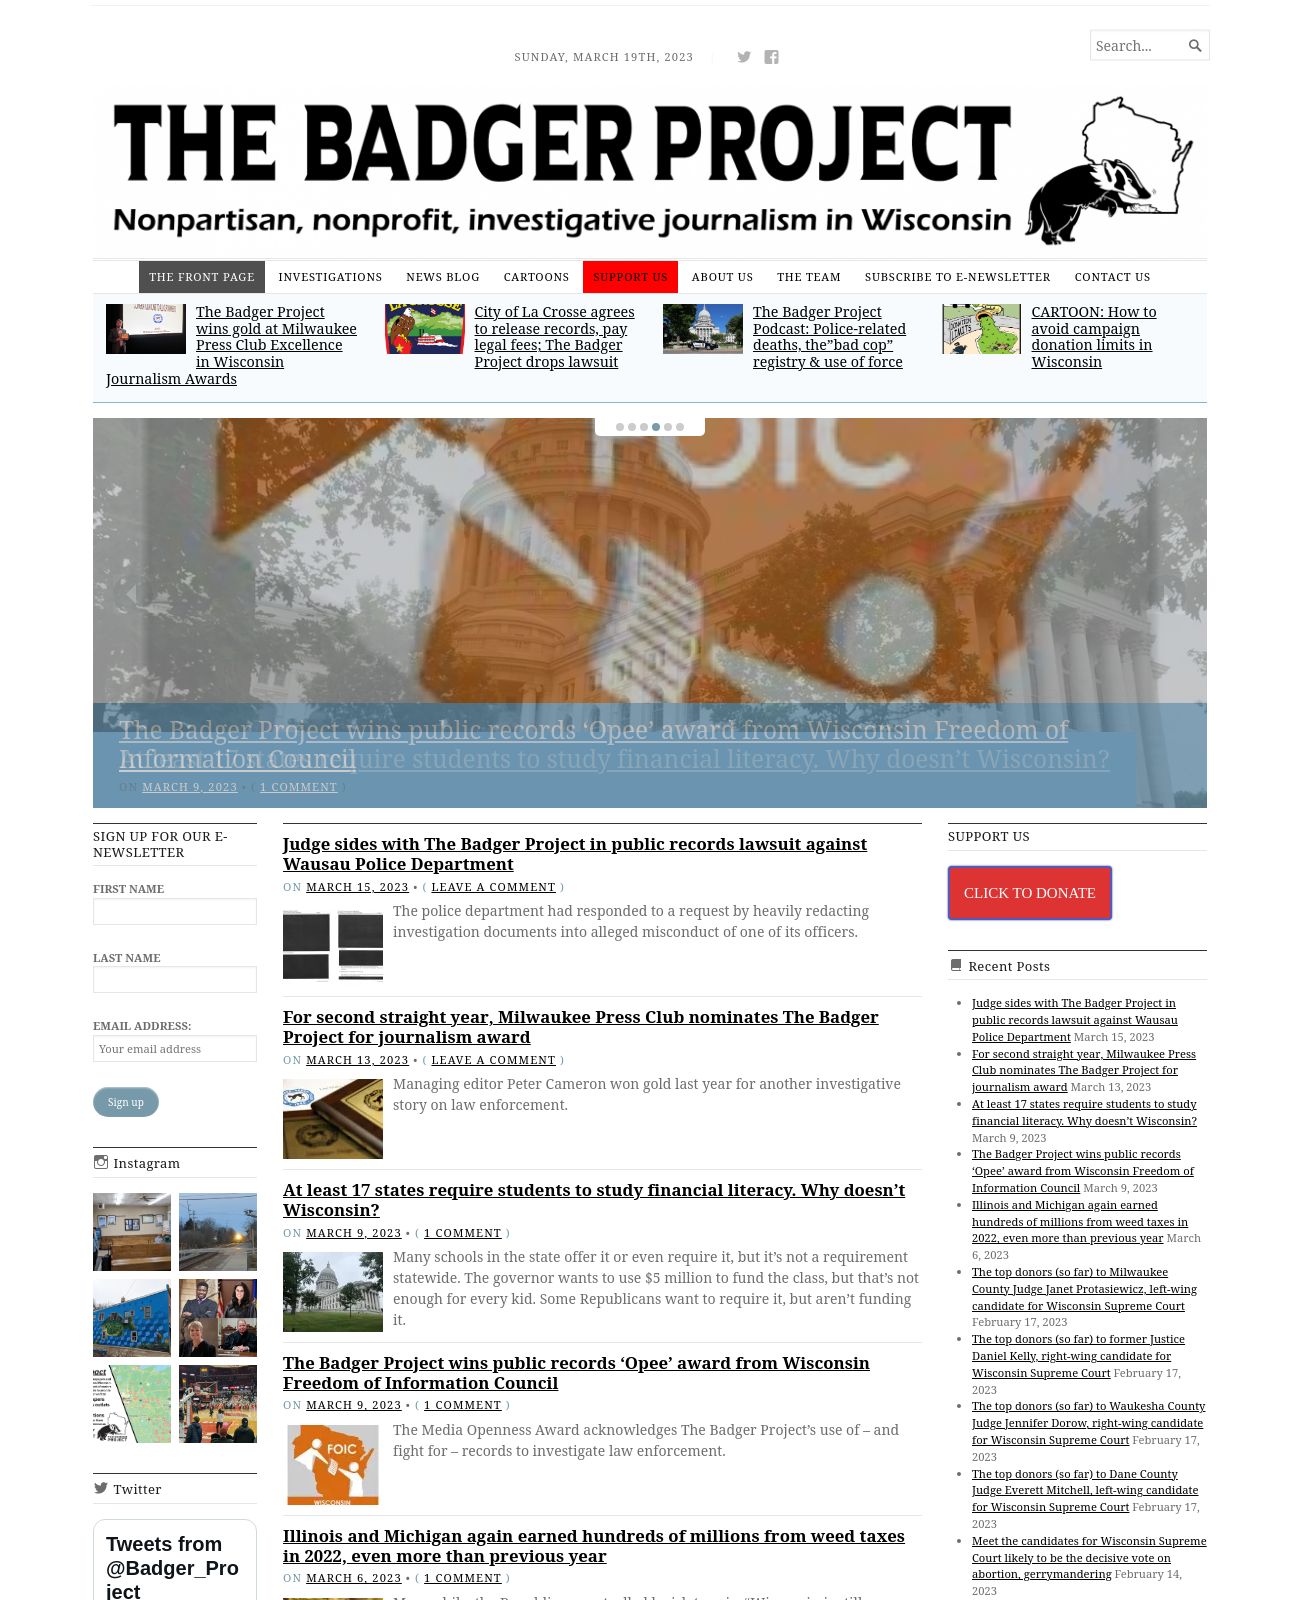 Badger Project at 2023-03-19 19:52:08-05:00 local time